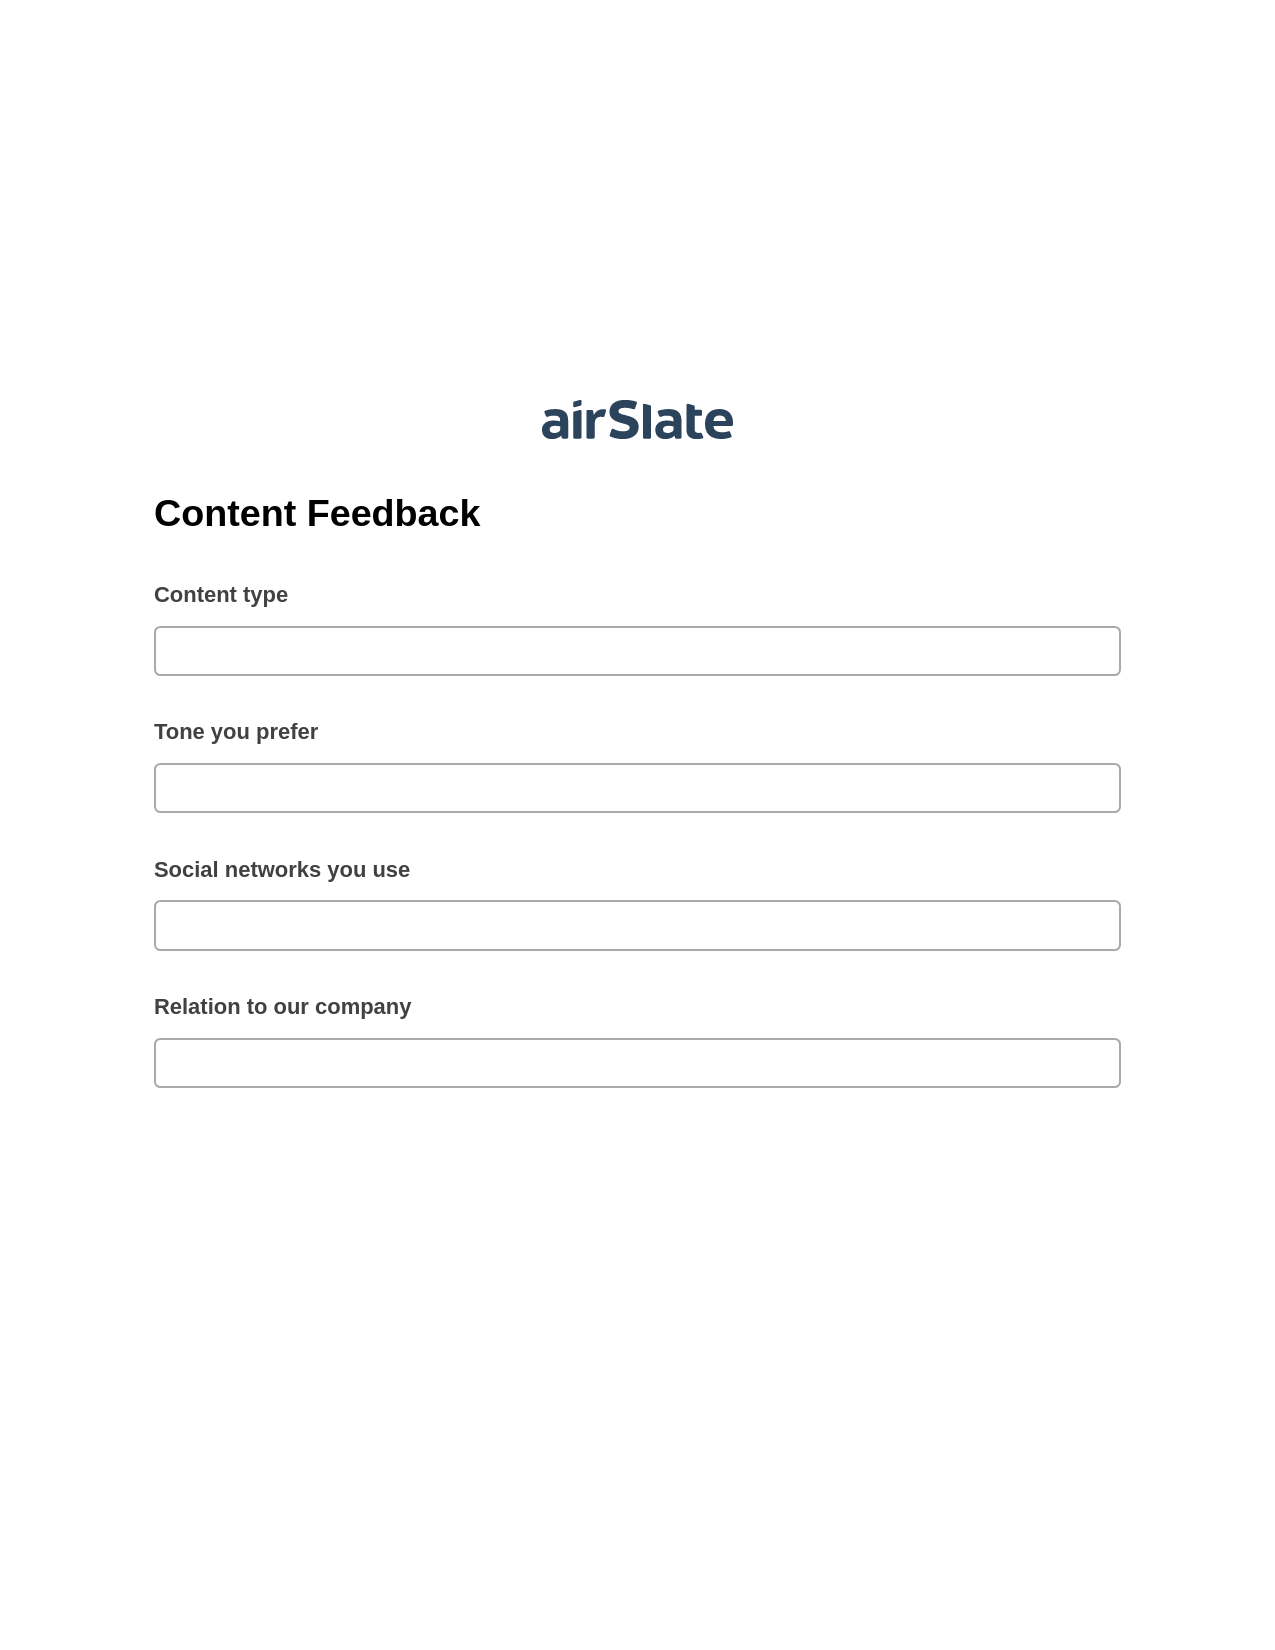 Multirole Content Feedback Pre-fill Slate from MS Dynamics 365 Records Bot, SendGrid send Campaign bot, Export to Google Sheet Bot